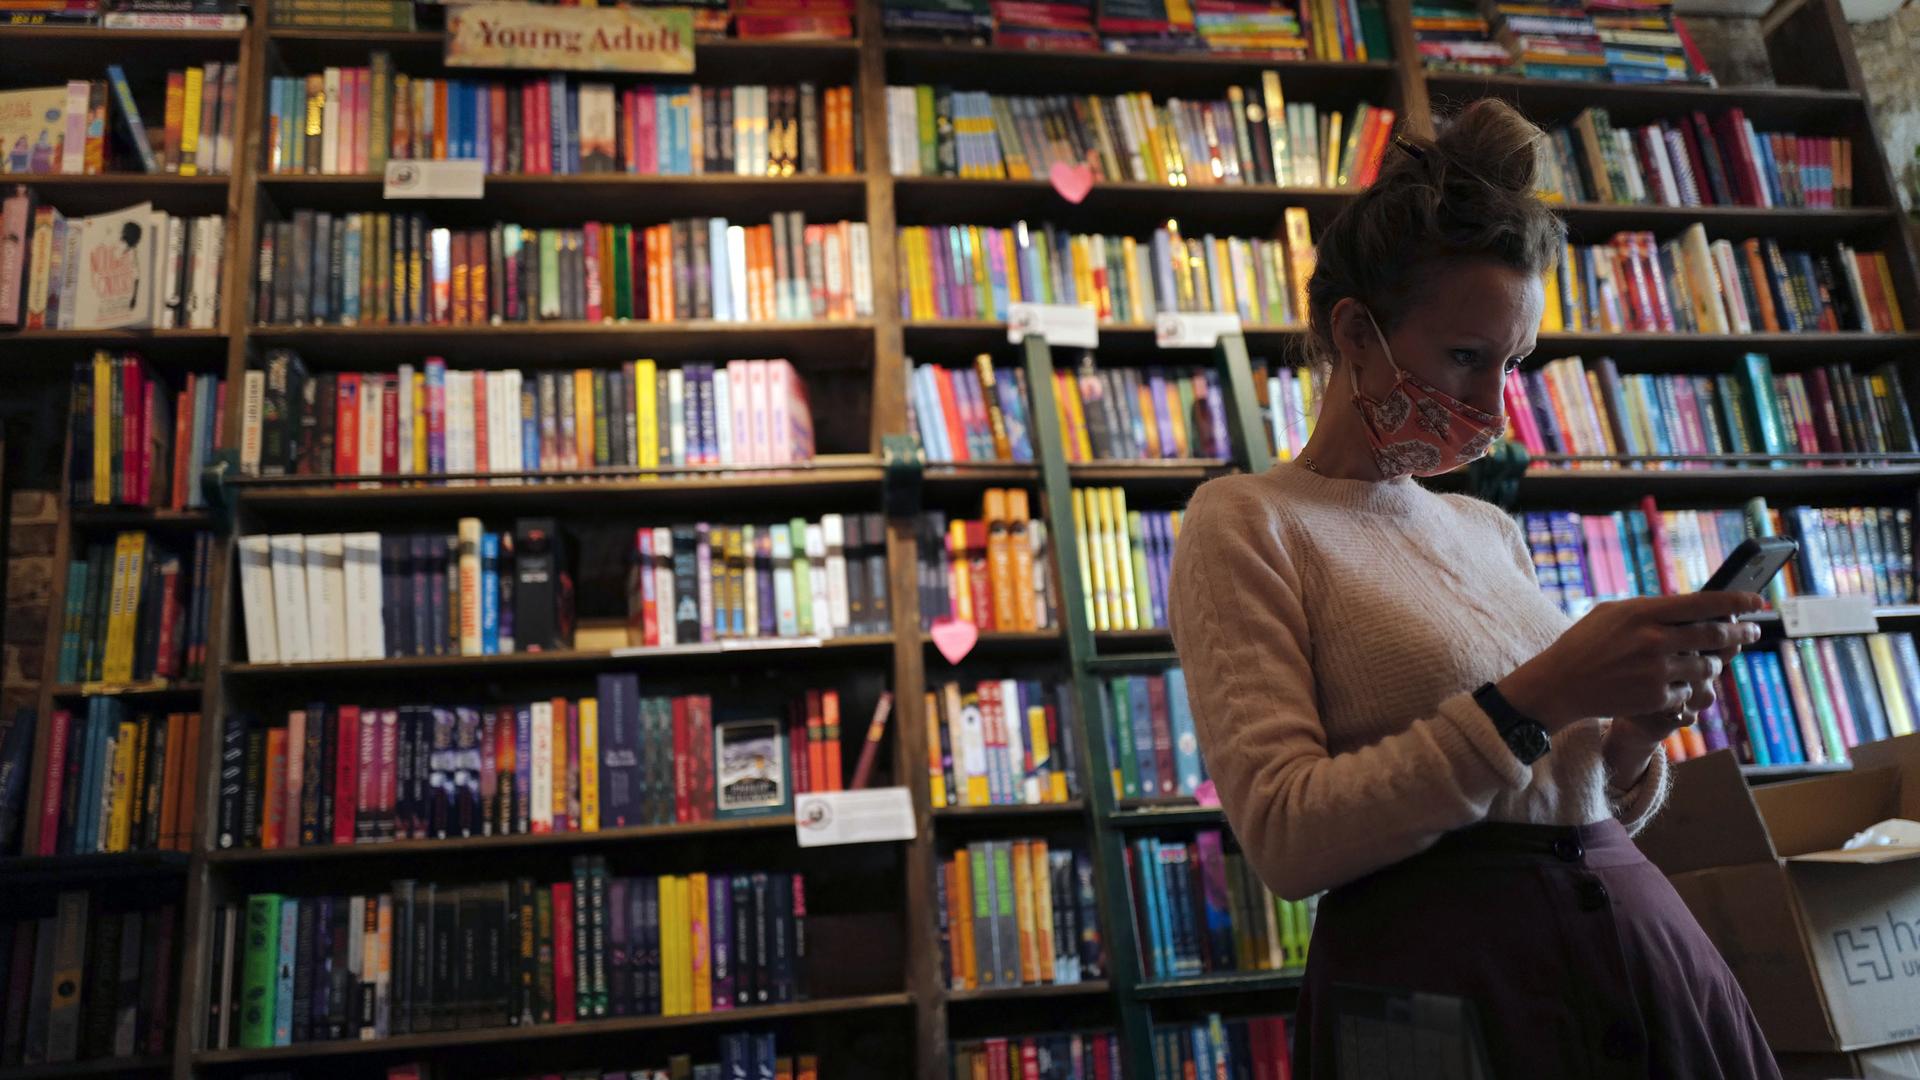 Sylvia Whitman, proprietor of the English and American literature Shakespeare and Co. bookstore, checks her messages on her phone in Paris, France, Thursday, Nov. 5, 2020.